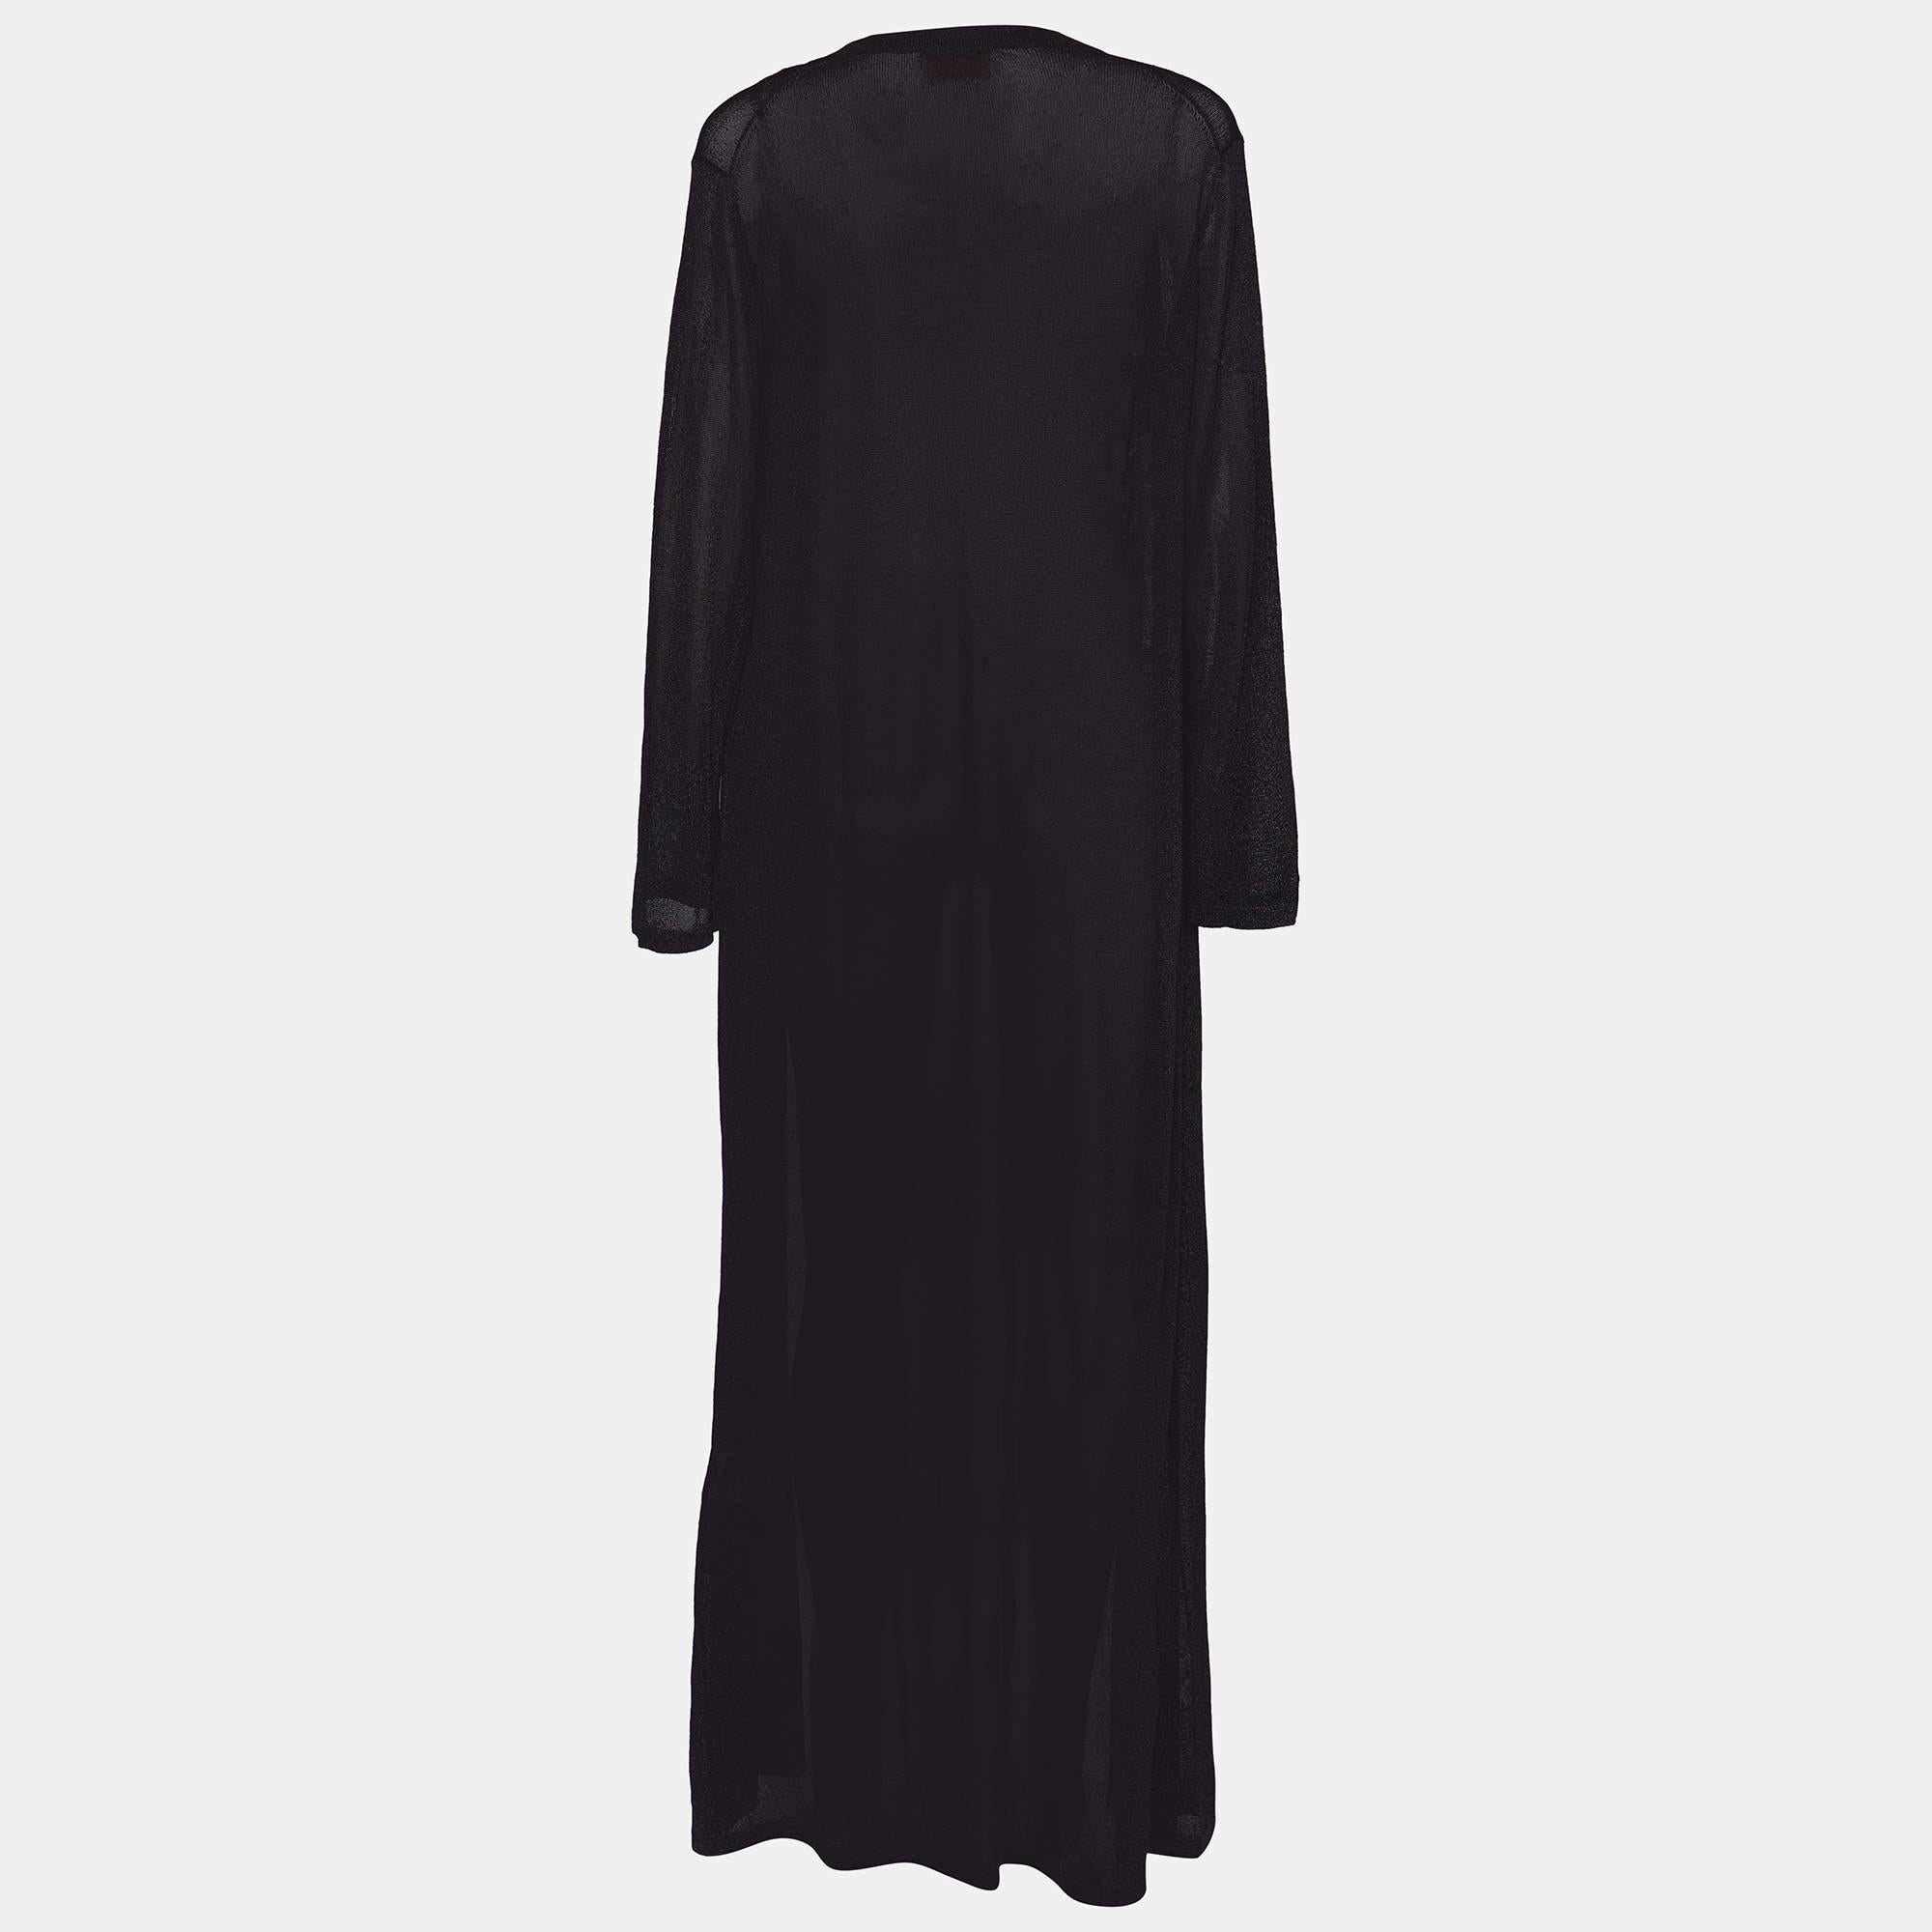 Introducing the Missoni Black Lurex Knit Open Front Long Shrug, the epitome of elegance and style. Crafted with premium black lurex knit, this versatile piece effortlessly adds a touch of glamour to any outfit. Its open front design and long length